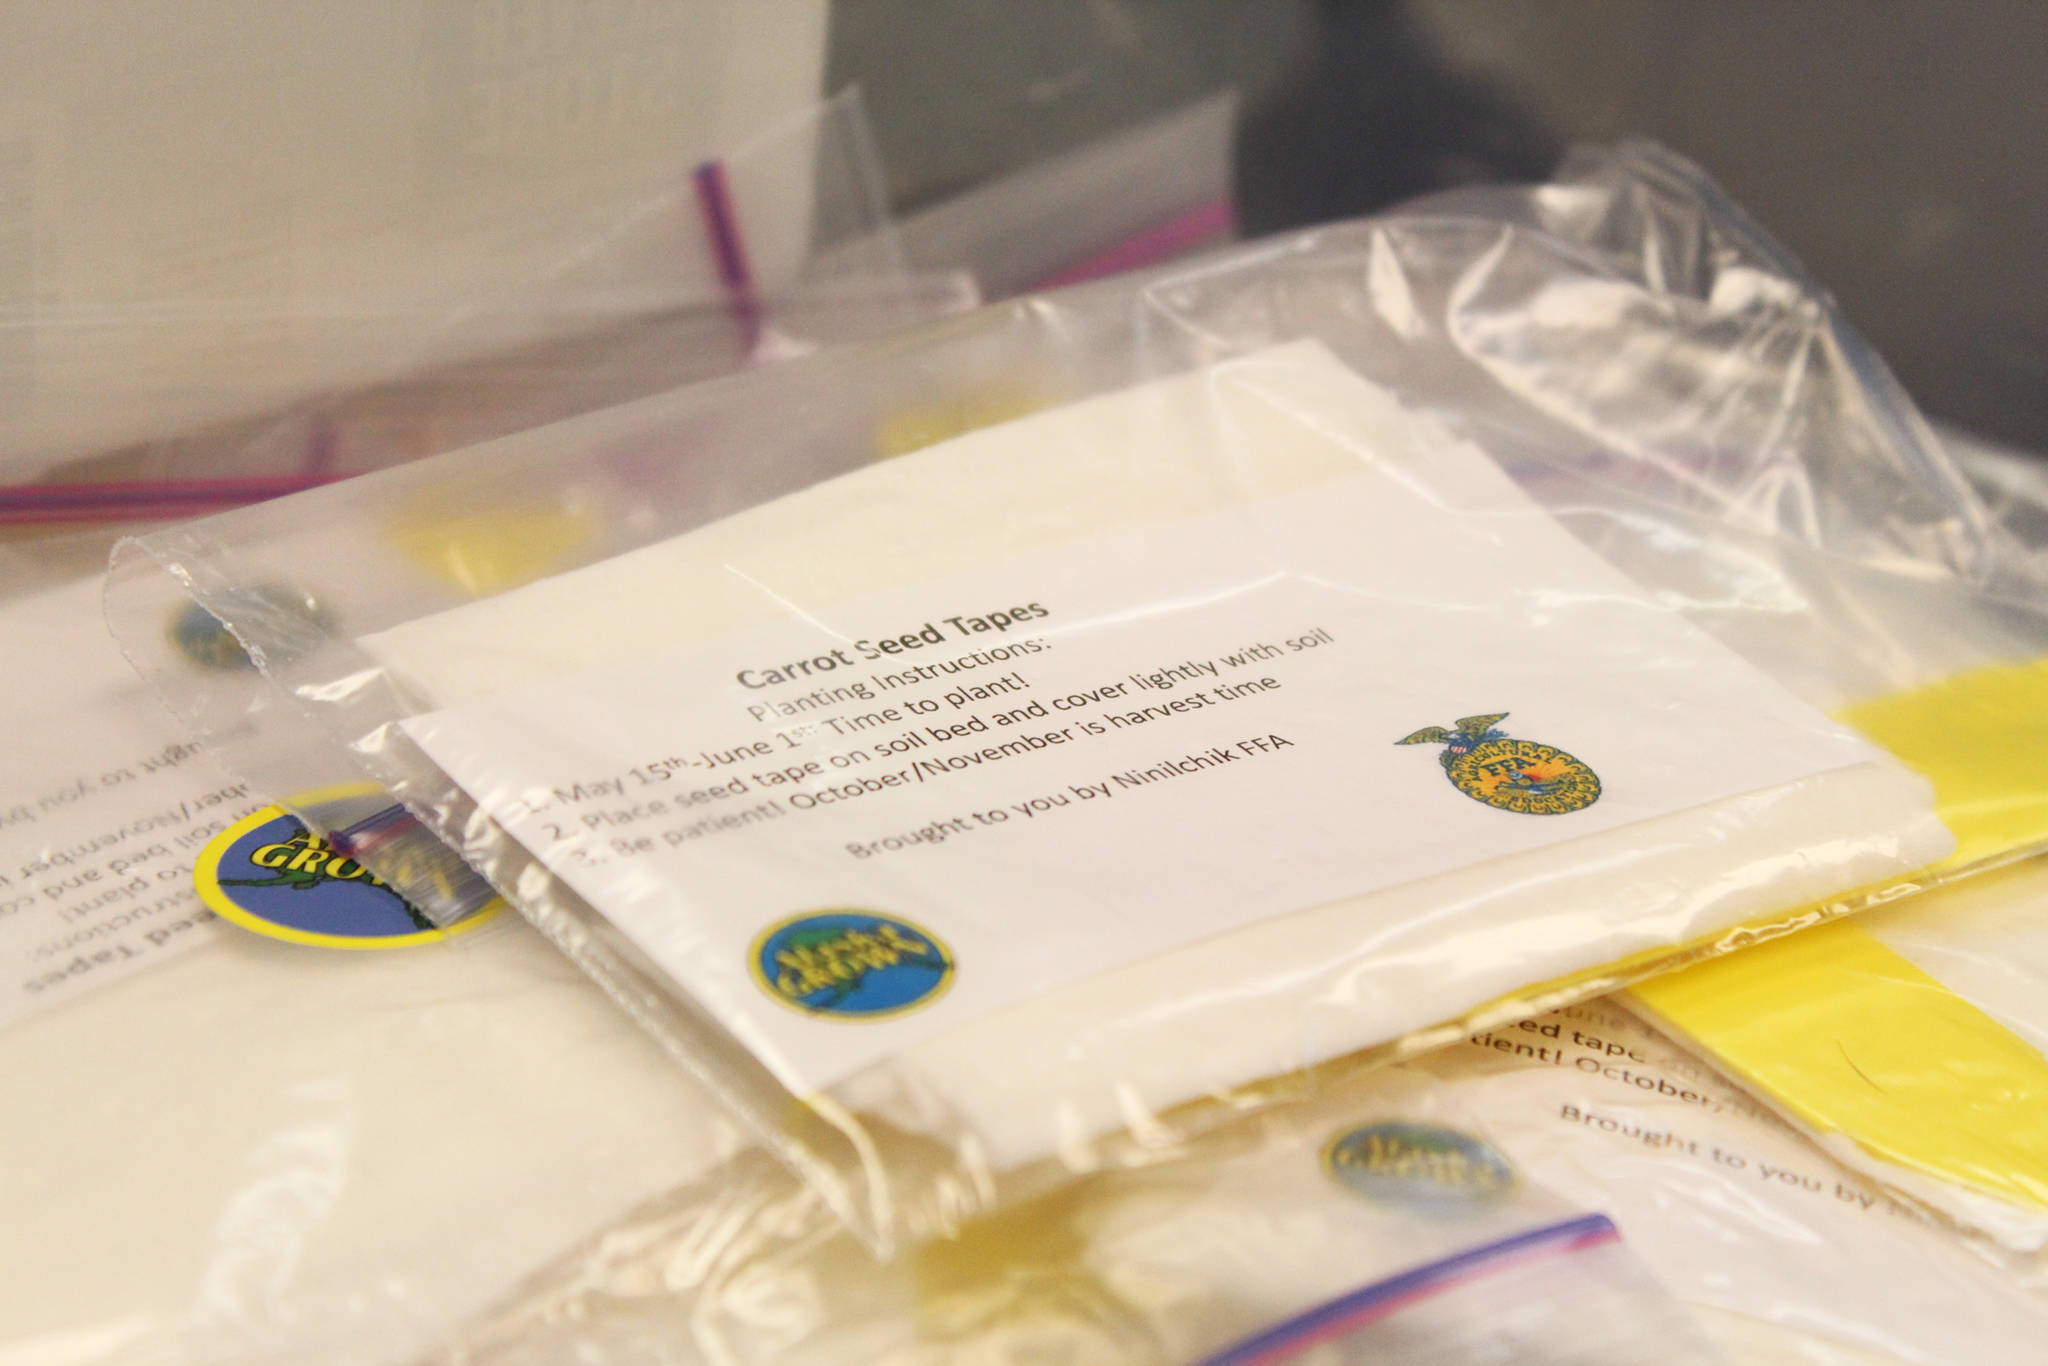 Packets with planting instructions lie in a box waiting to be opened by eager students Tuesday, May 1, 2018 at Ninilchik School in Ninilchik, Alaska. Members of the Ninilchik chapter of the National FFA Organization visited the school to teach them how to made seed tapes, or a way or readying and storing seeds for later planting. (Photo by Megan Pacer/Homer News)